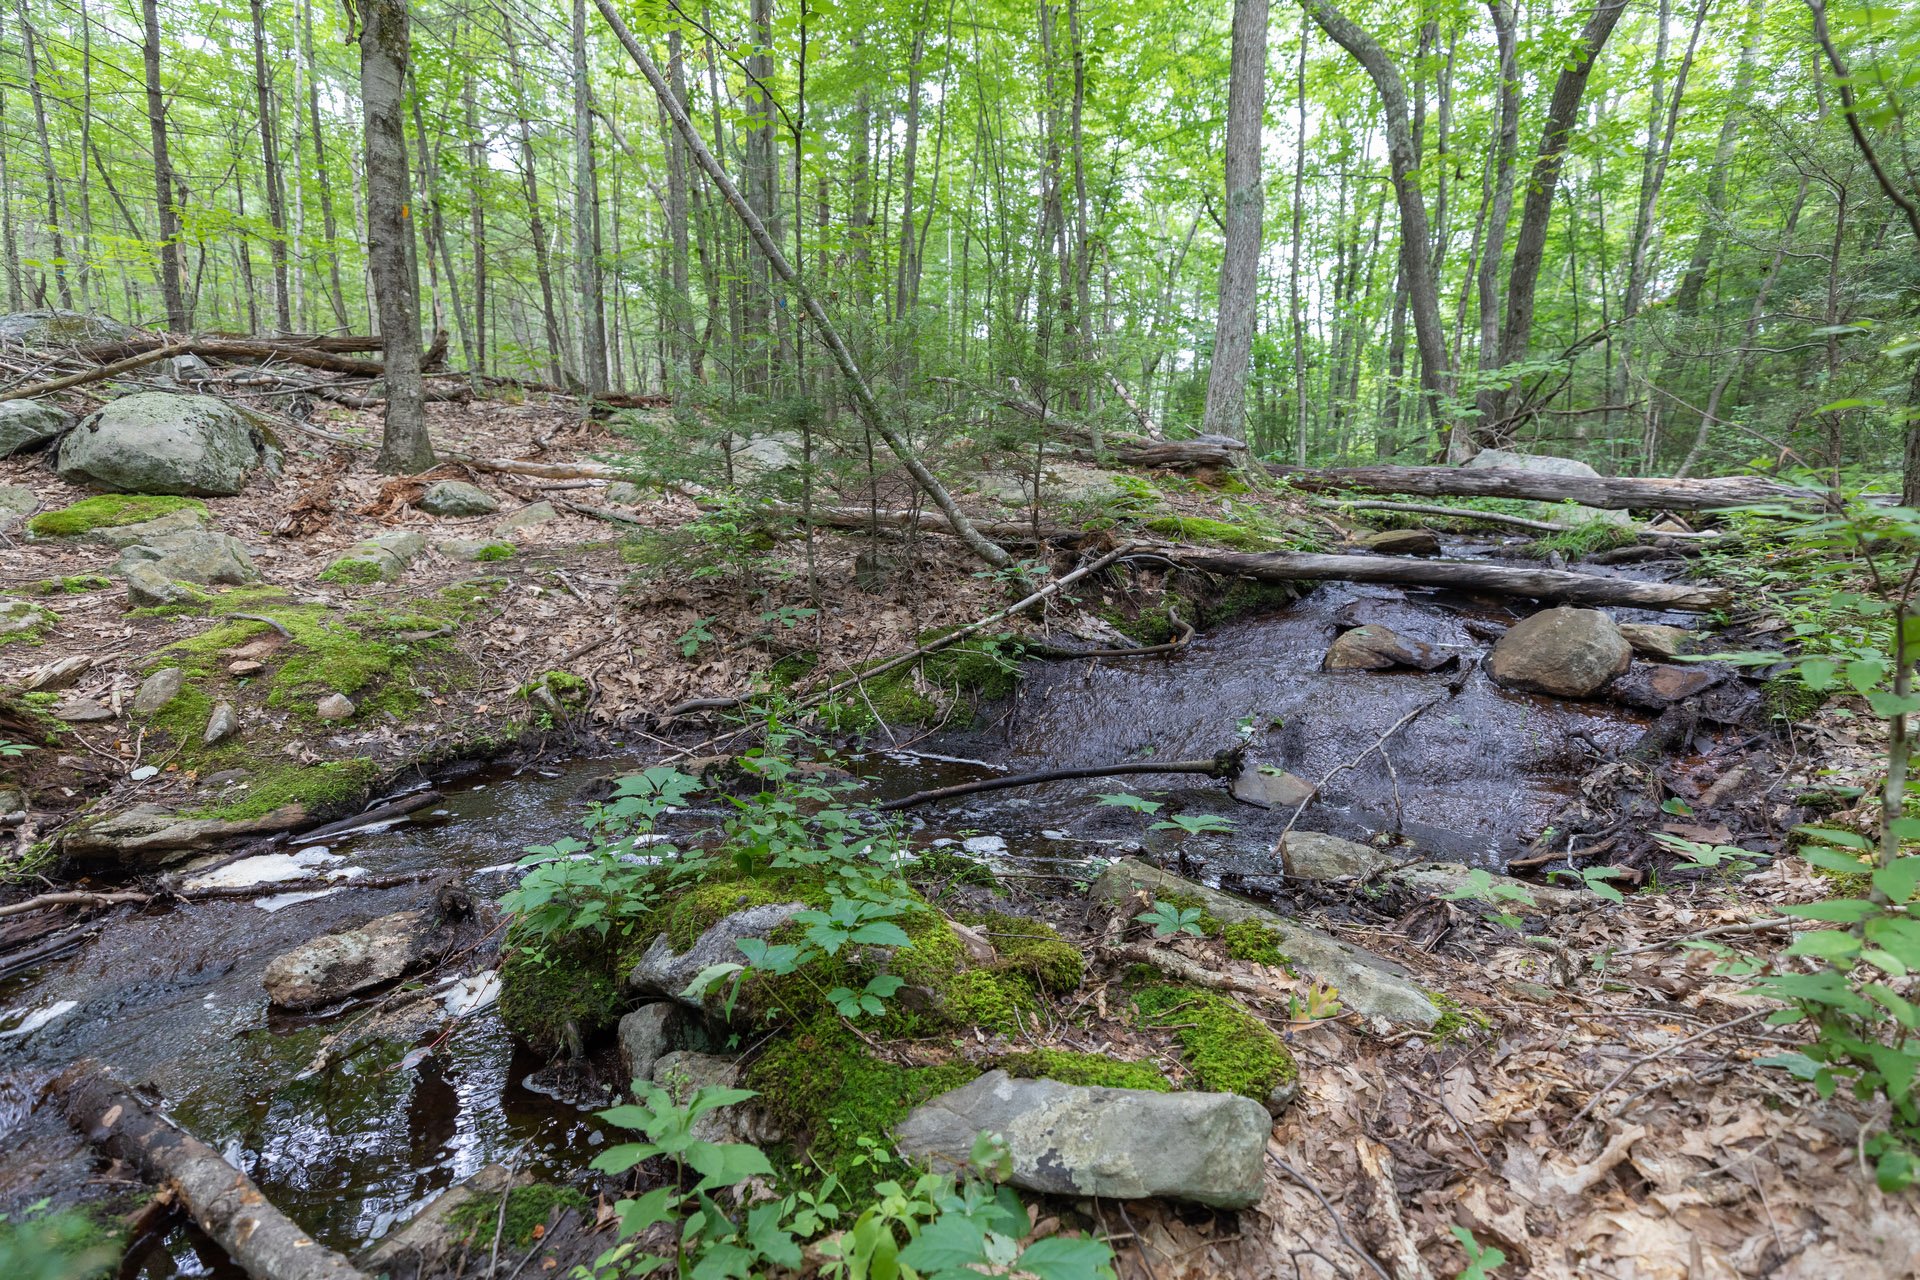 Rocky brook with fallen logs crossing between banks runs in a forest.